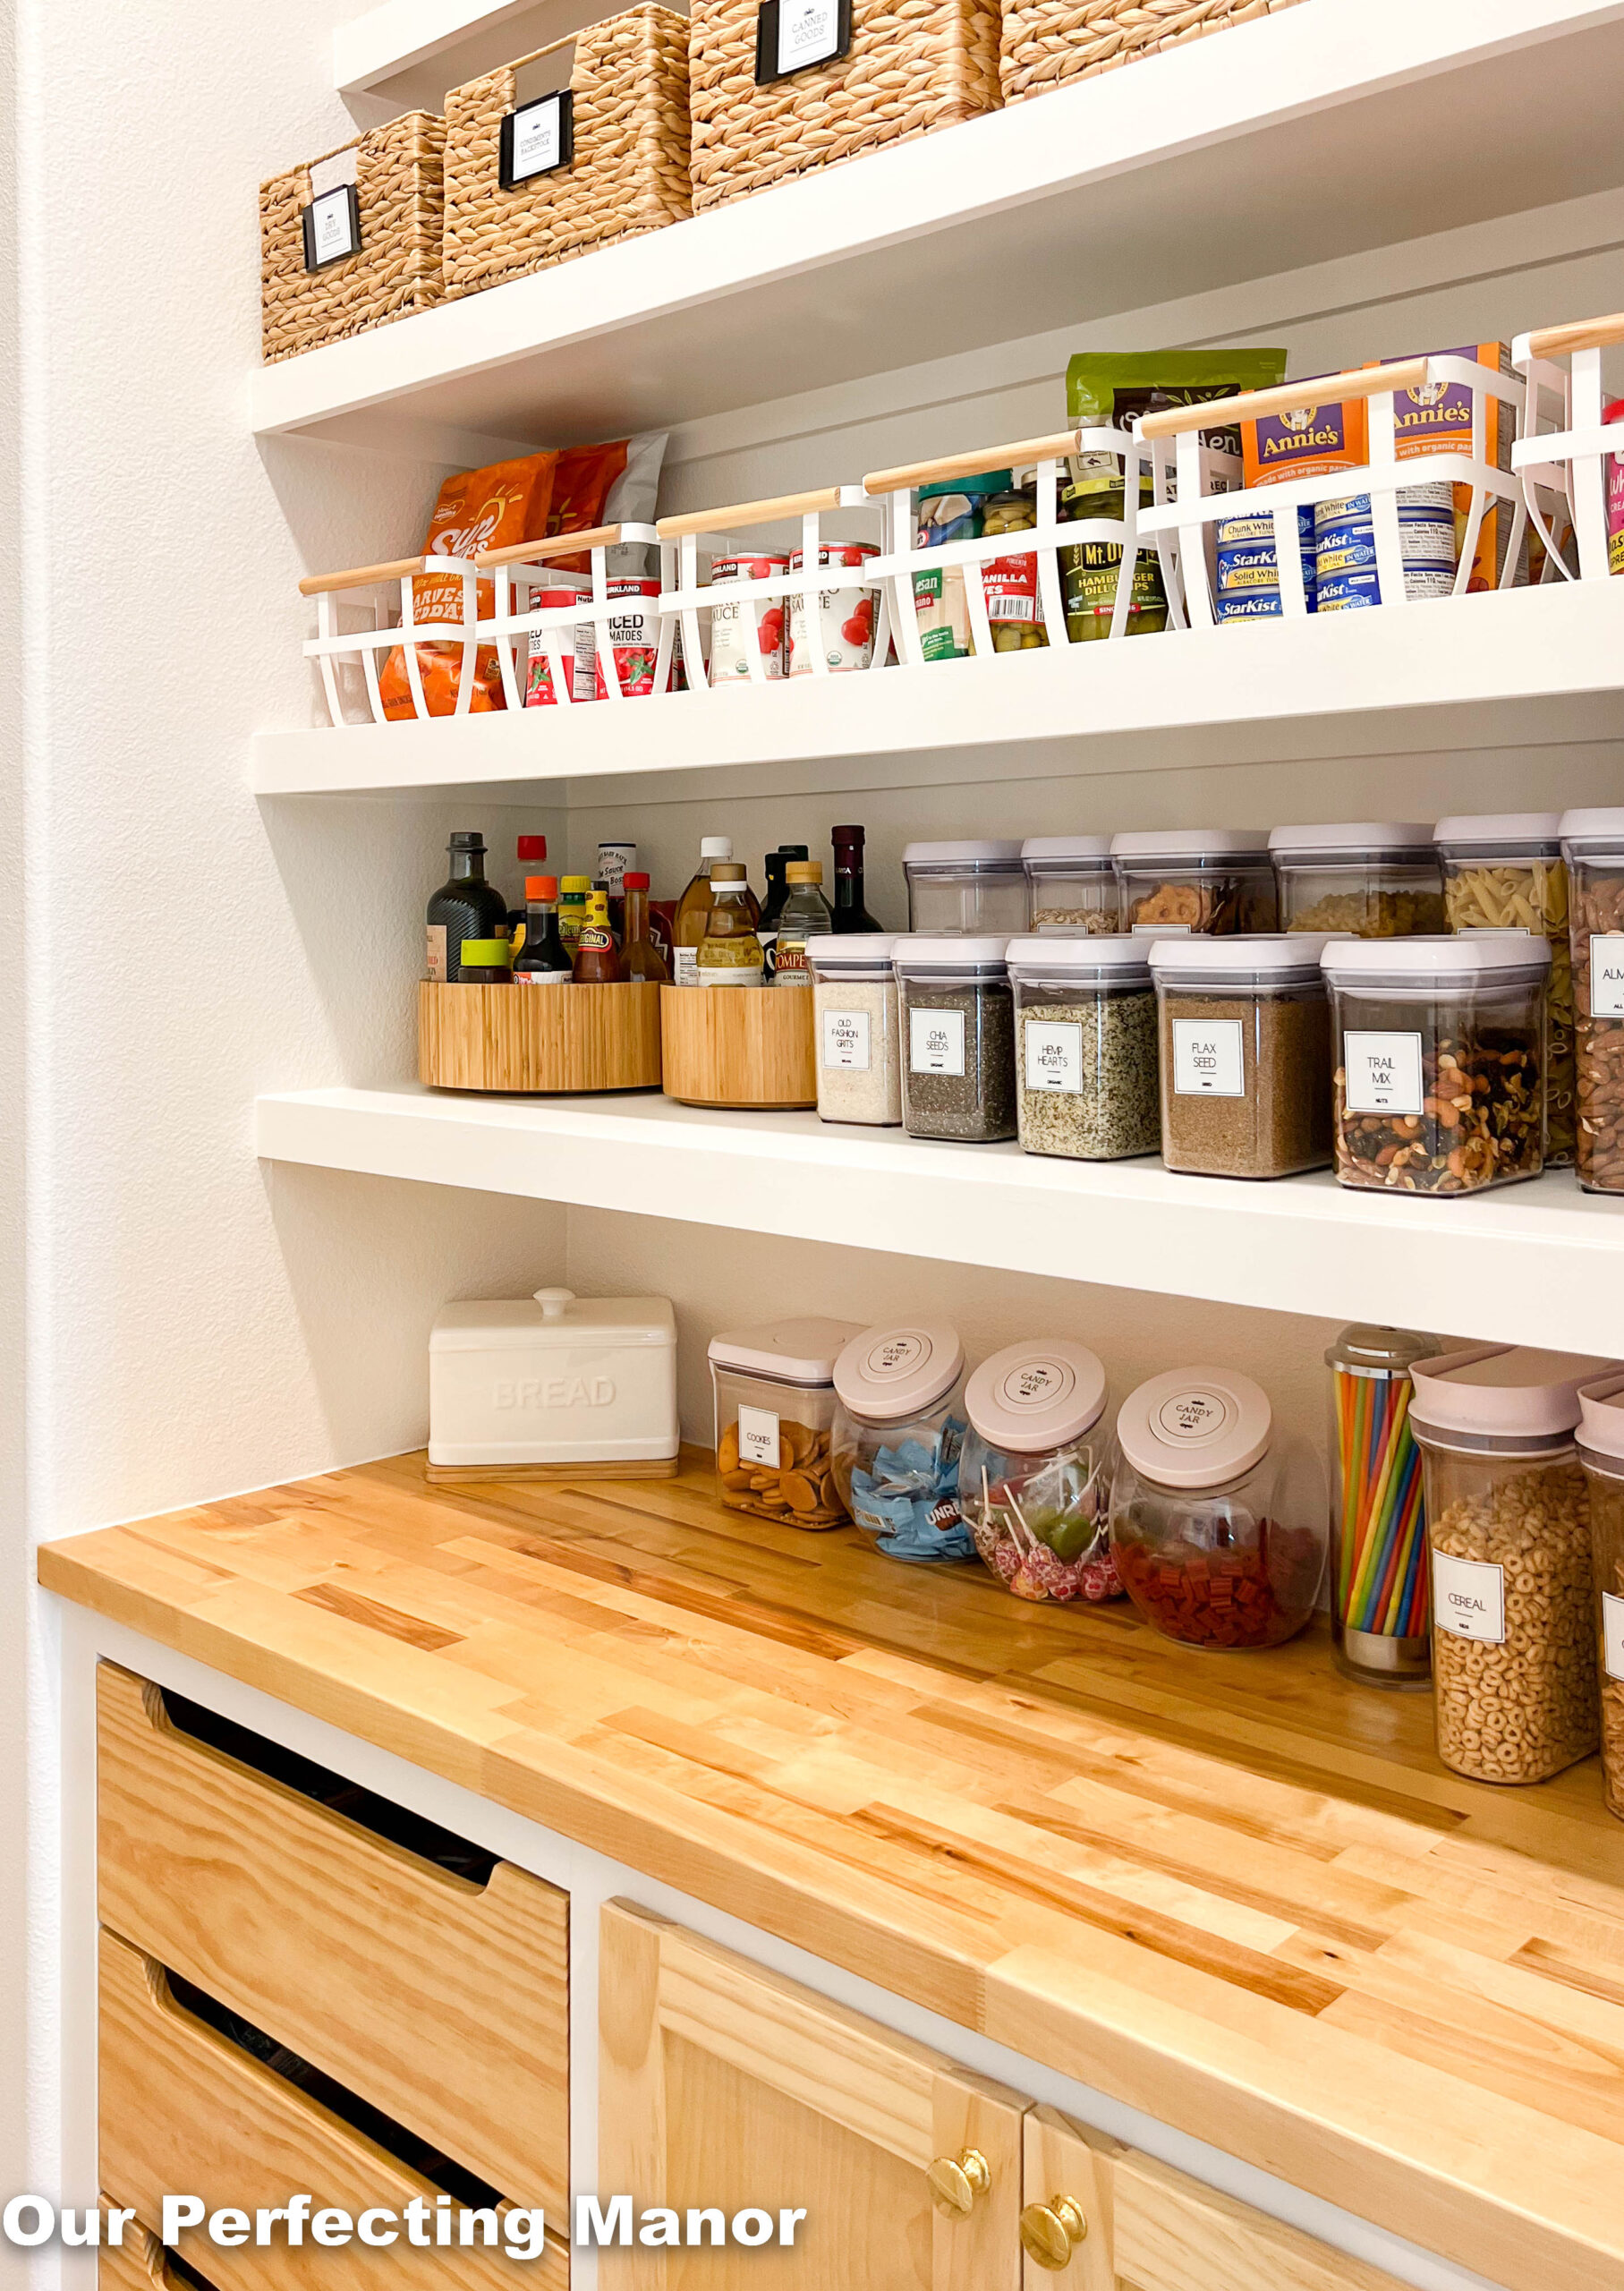 How I Use Cabinets as our Pantry + the New Pretty Organization!